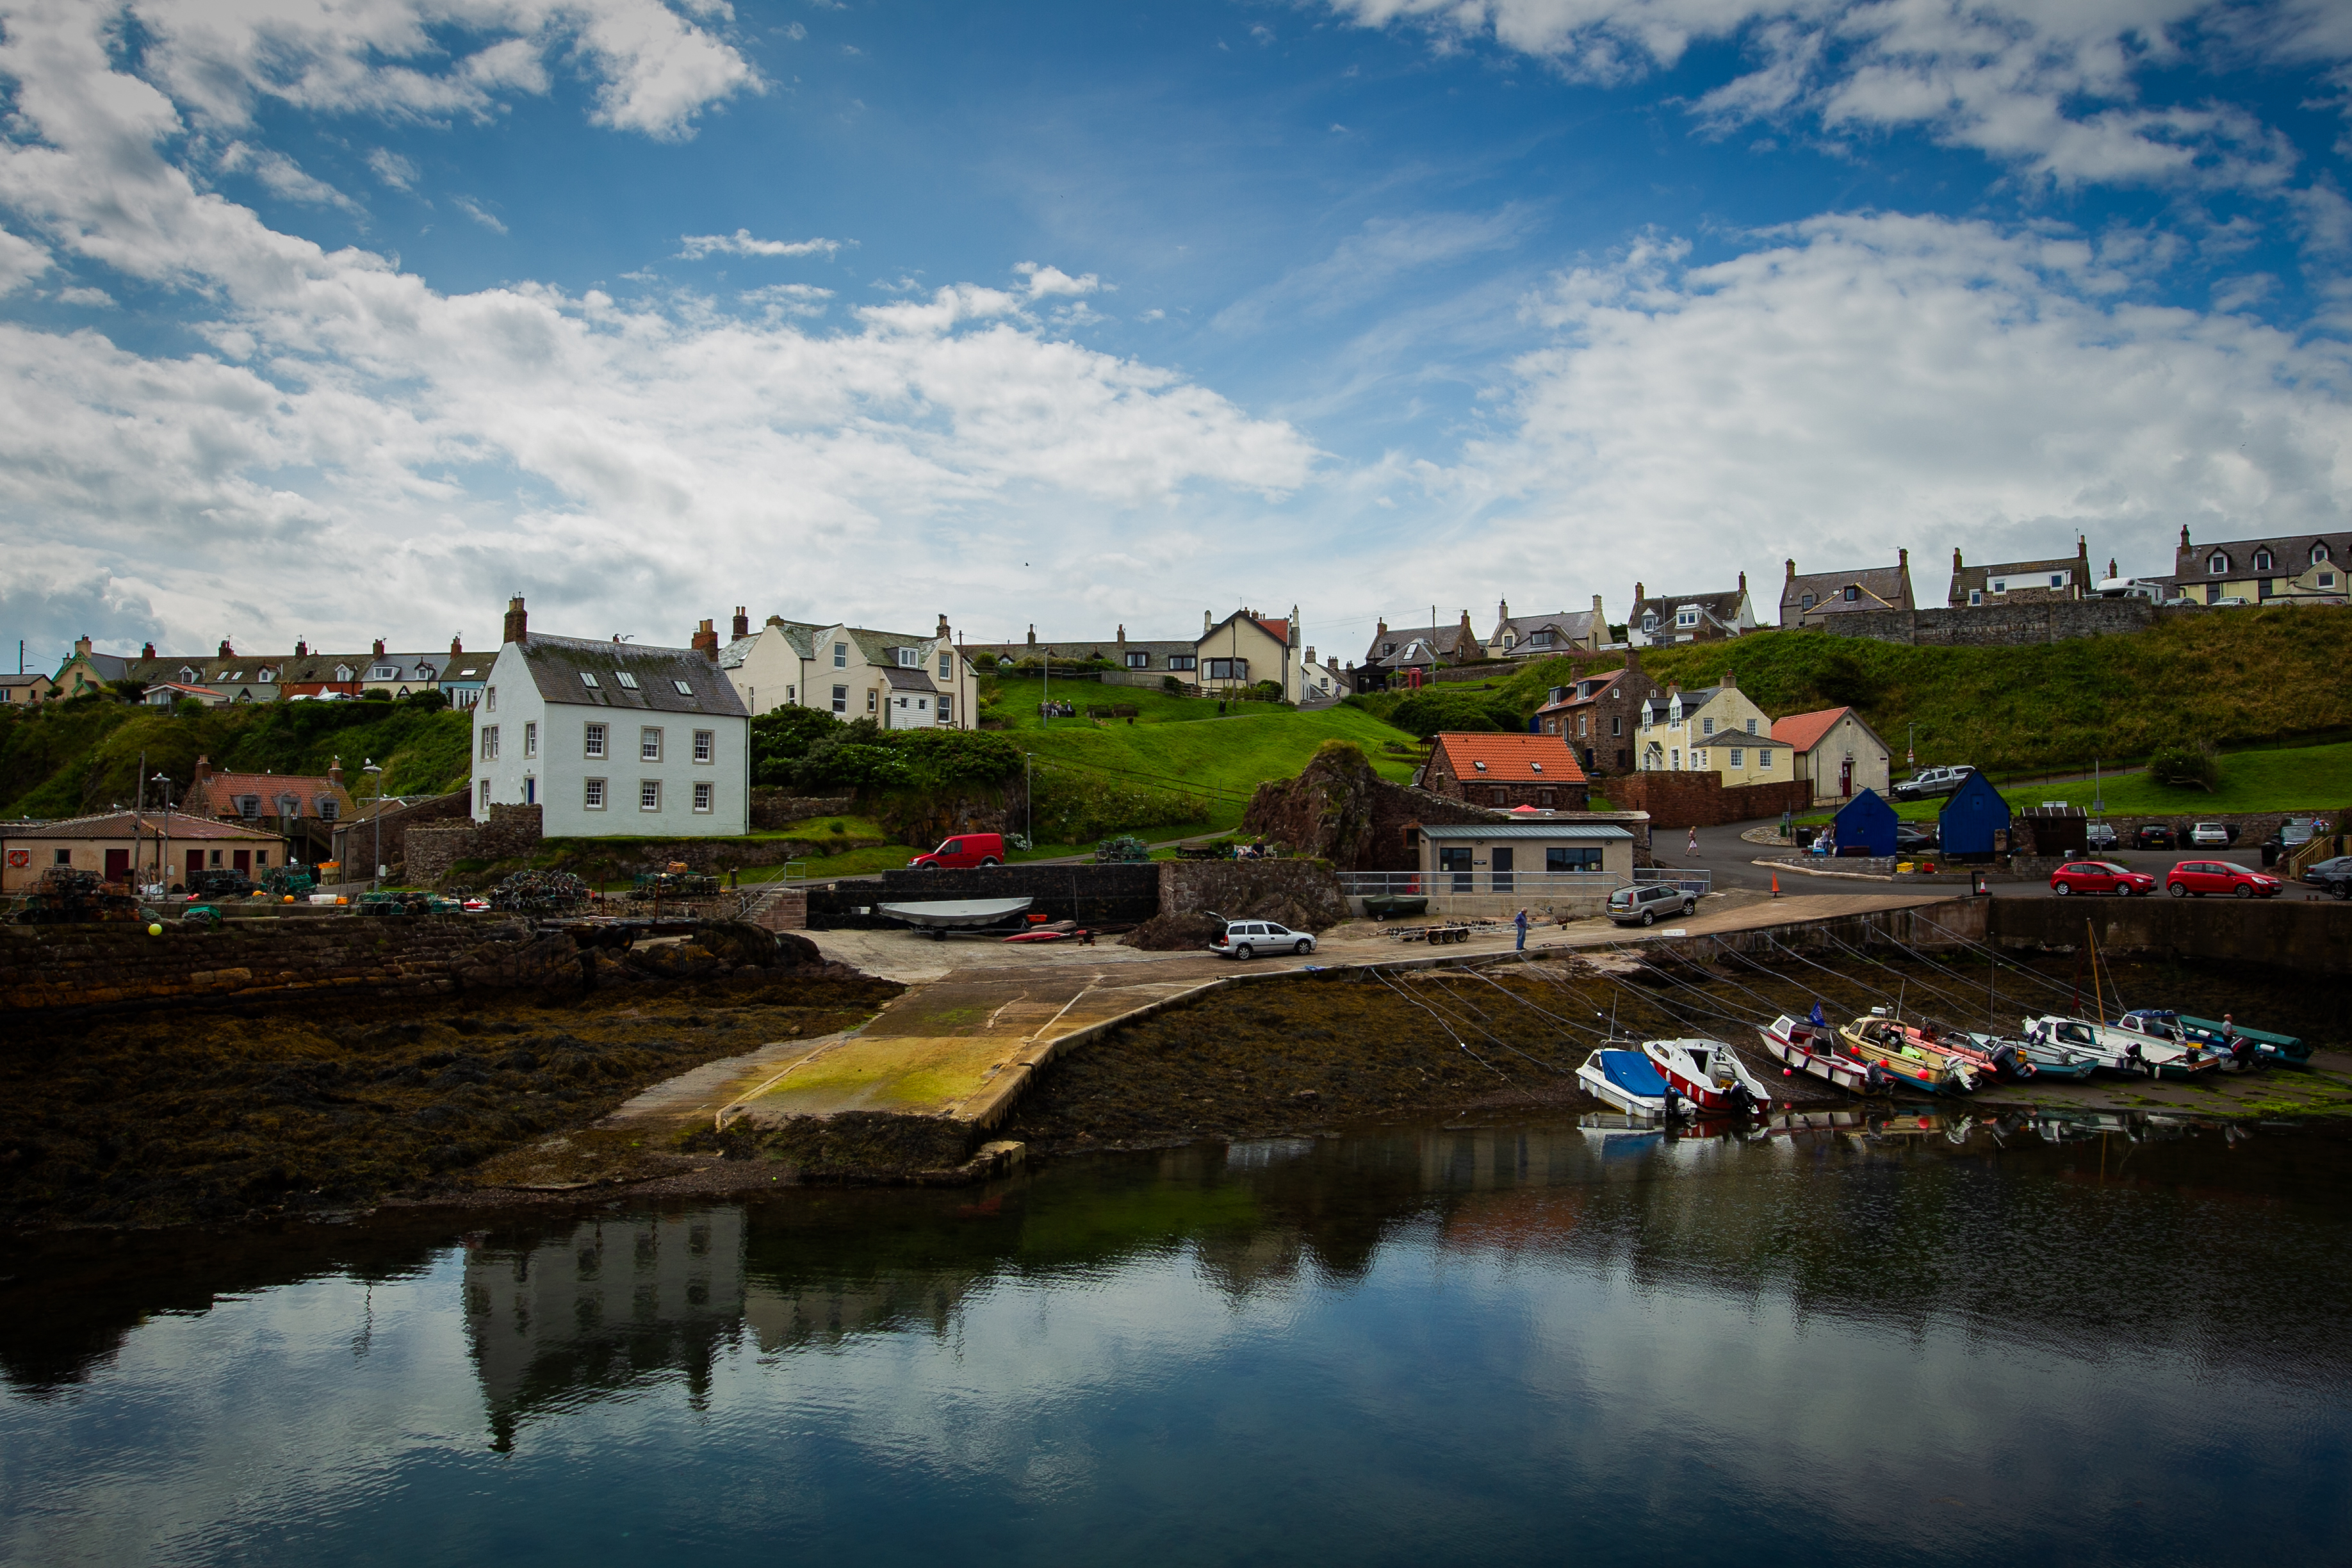 St Abbs offers ramblers en route to Berwick respite in a pretty setting